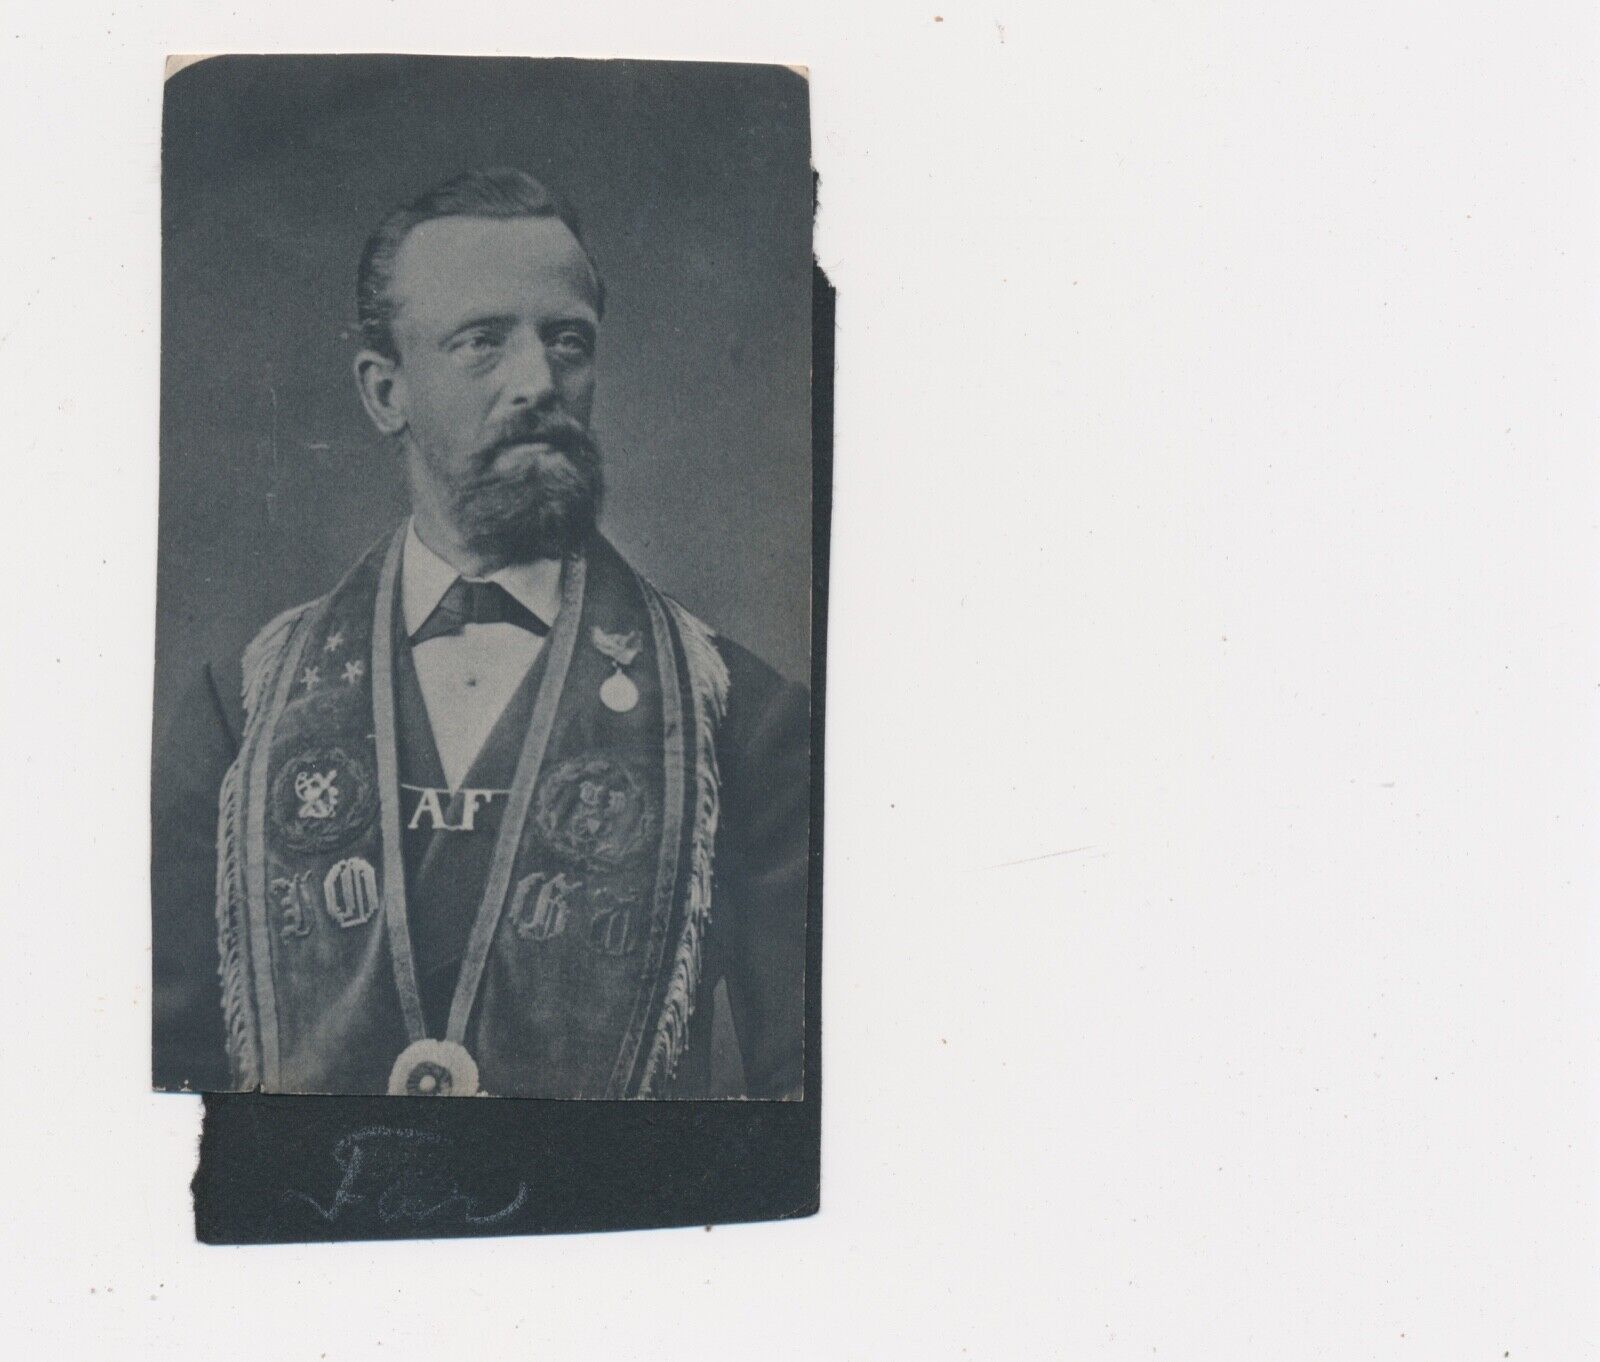 Rare 1910 Vintage Photograph Masonic Bearded Man Embroidered Vest Medals A.F. 